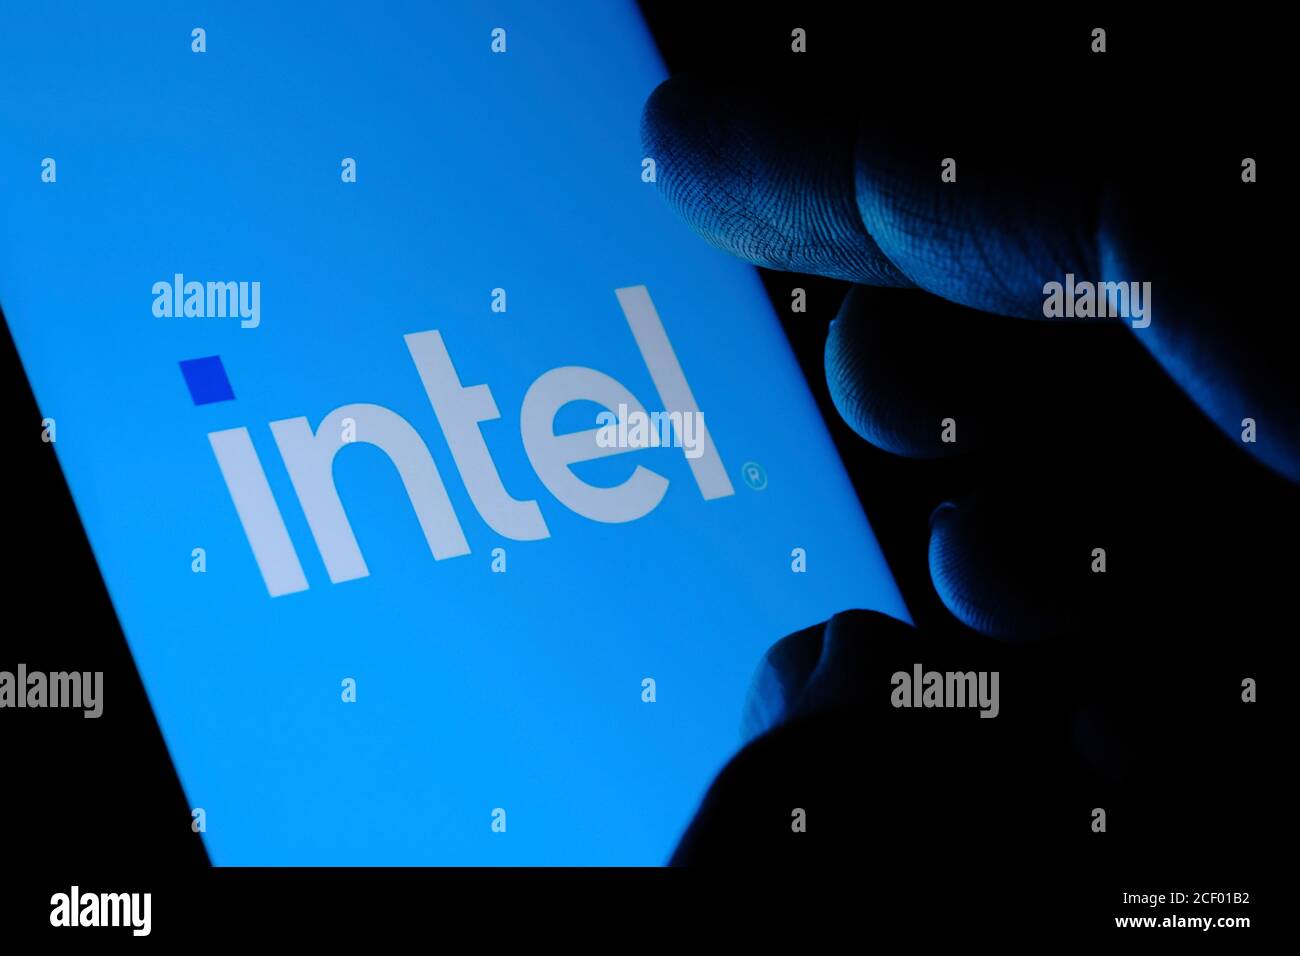 New Intel logo seen on the screen and blurred fingertip touching it in a dark. Intel presented its rebranded logotype Stock Photo